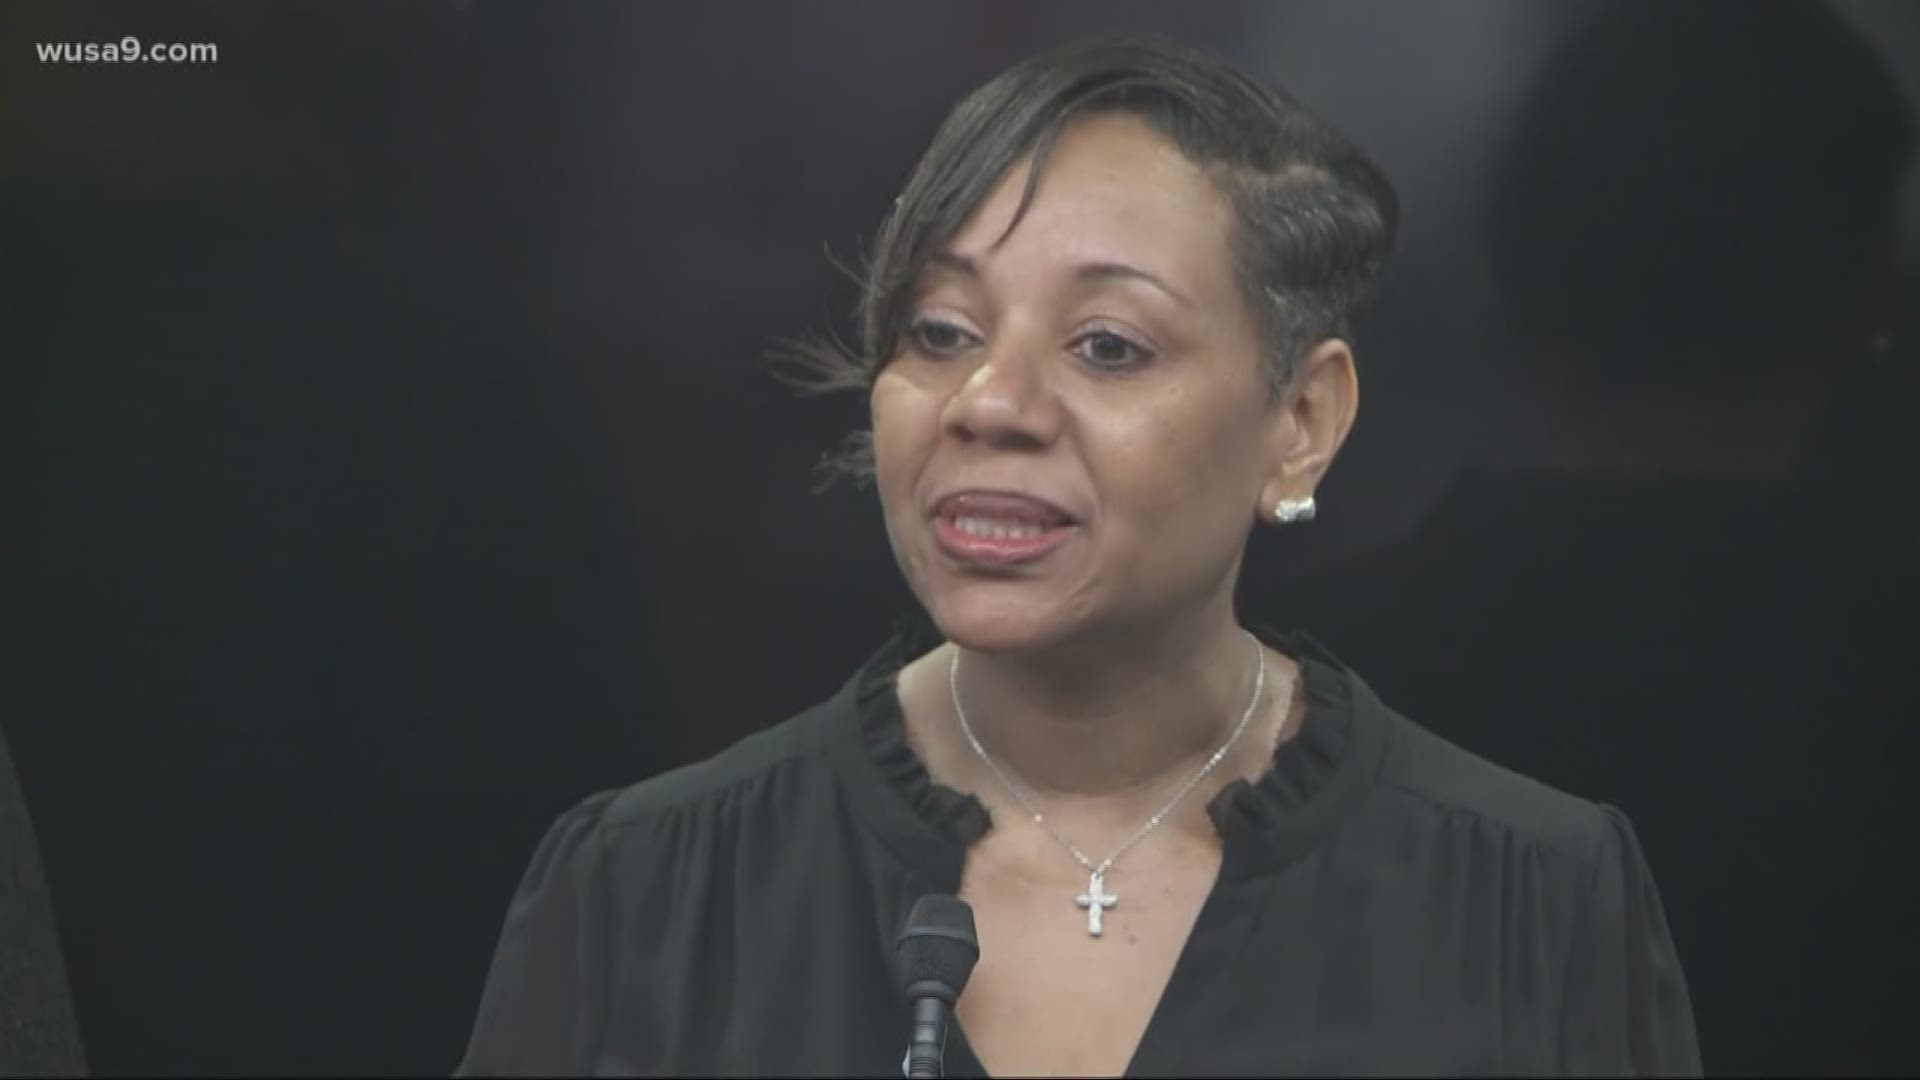 She has been acting as the interim chief. Dr. Goldson has also served as Deputy Superintendent of Teaching and Learning.